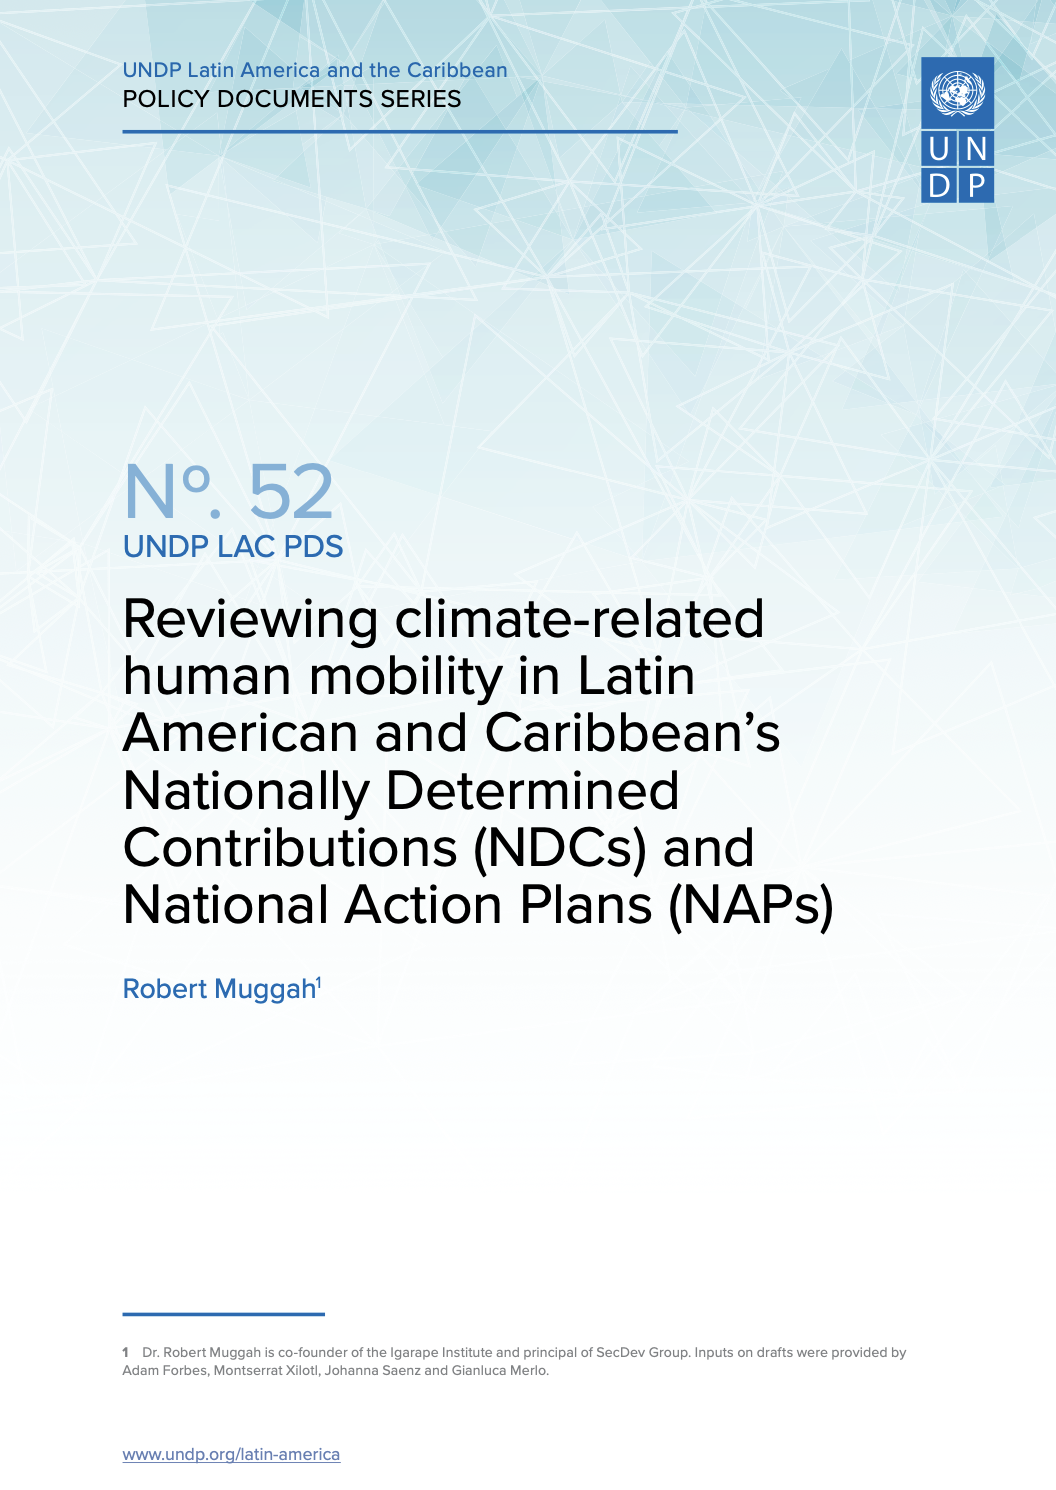 Reviewing climate-related human mobility in Latin American and Caribbean’s Nationally Determined Contributions (NDCs) and National Action Plans (NAPs)